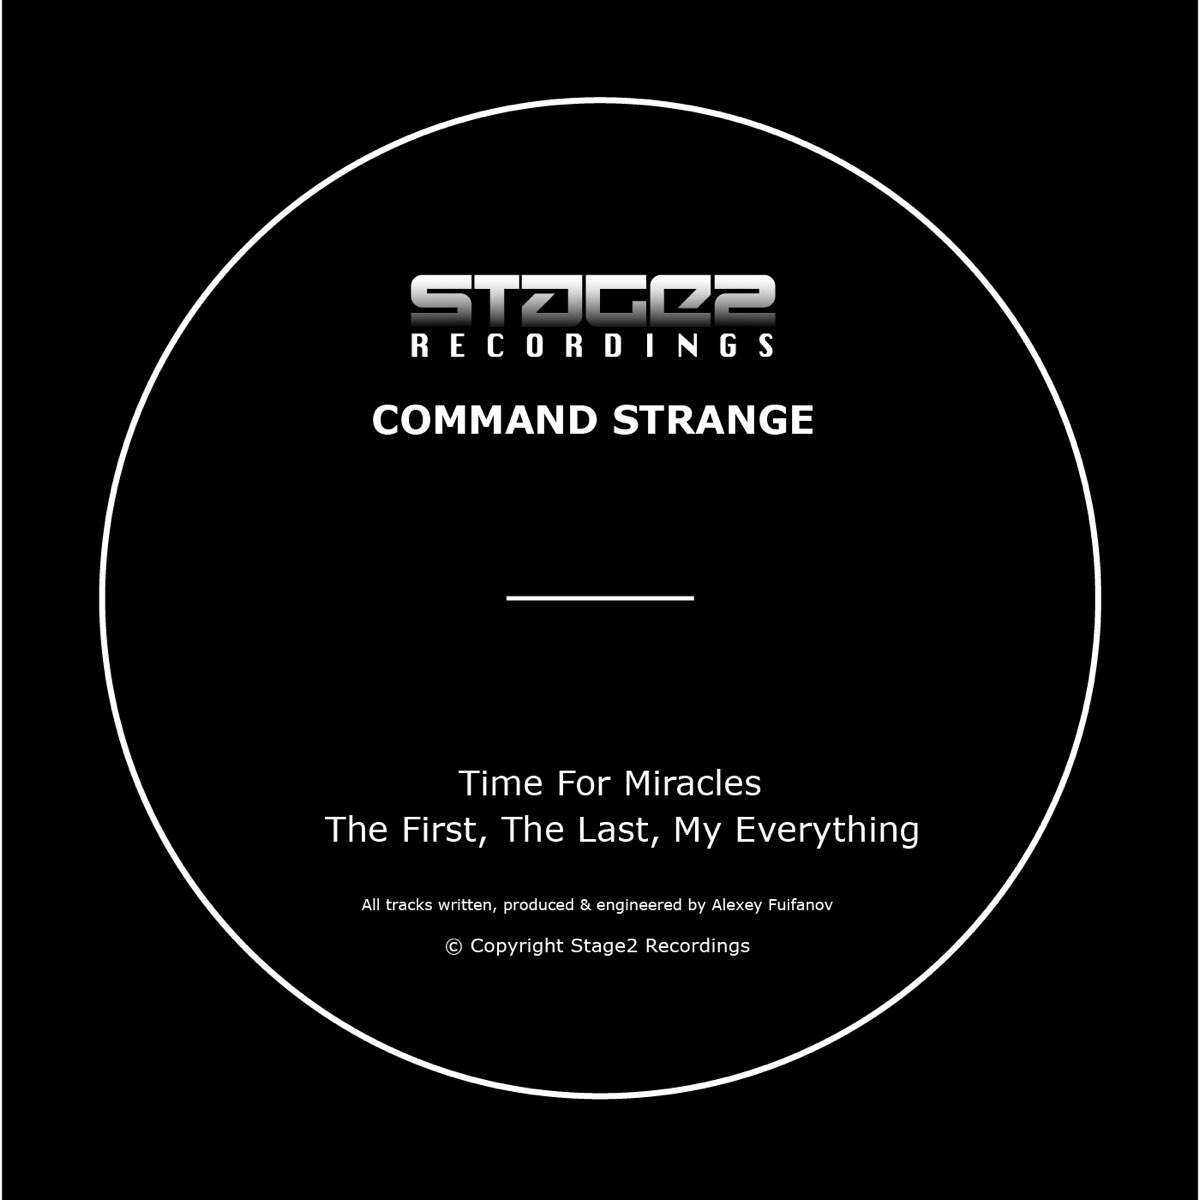 Command Strange. Command Strange – everything / Mirage. Stage Label. Eric Deray - time for Miracles. Command песня